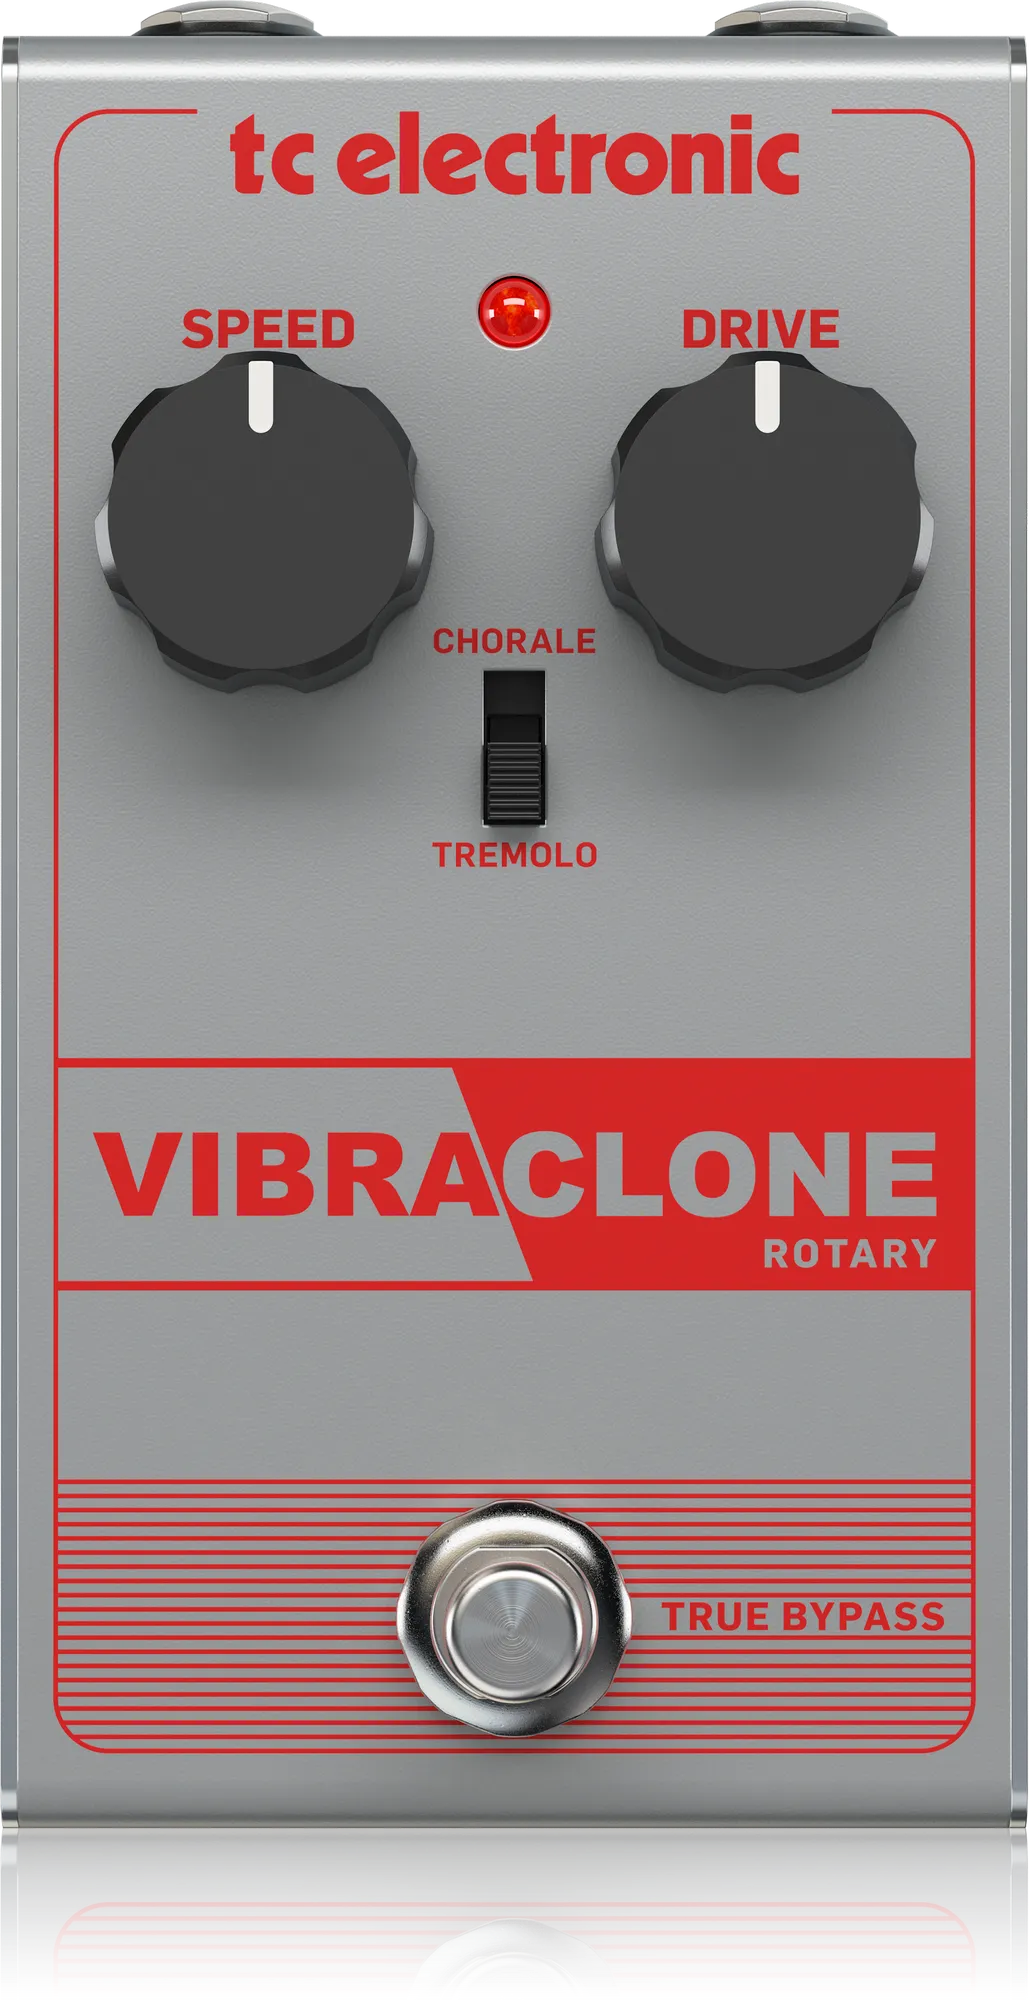 Vibraclone Rotary Guitar Pedal By TC Electronic